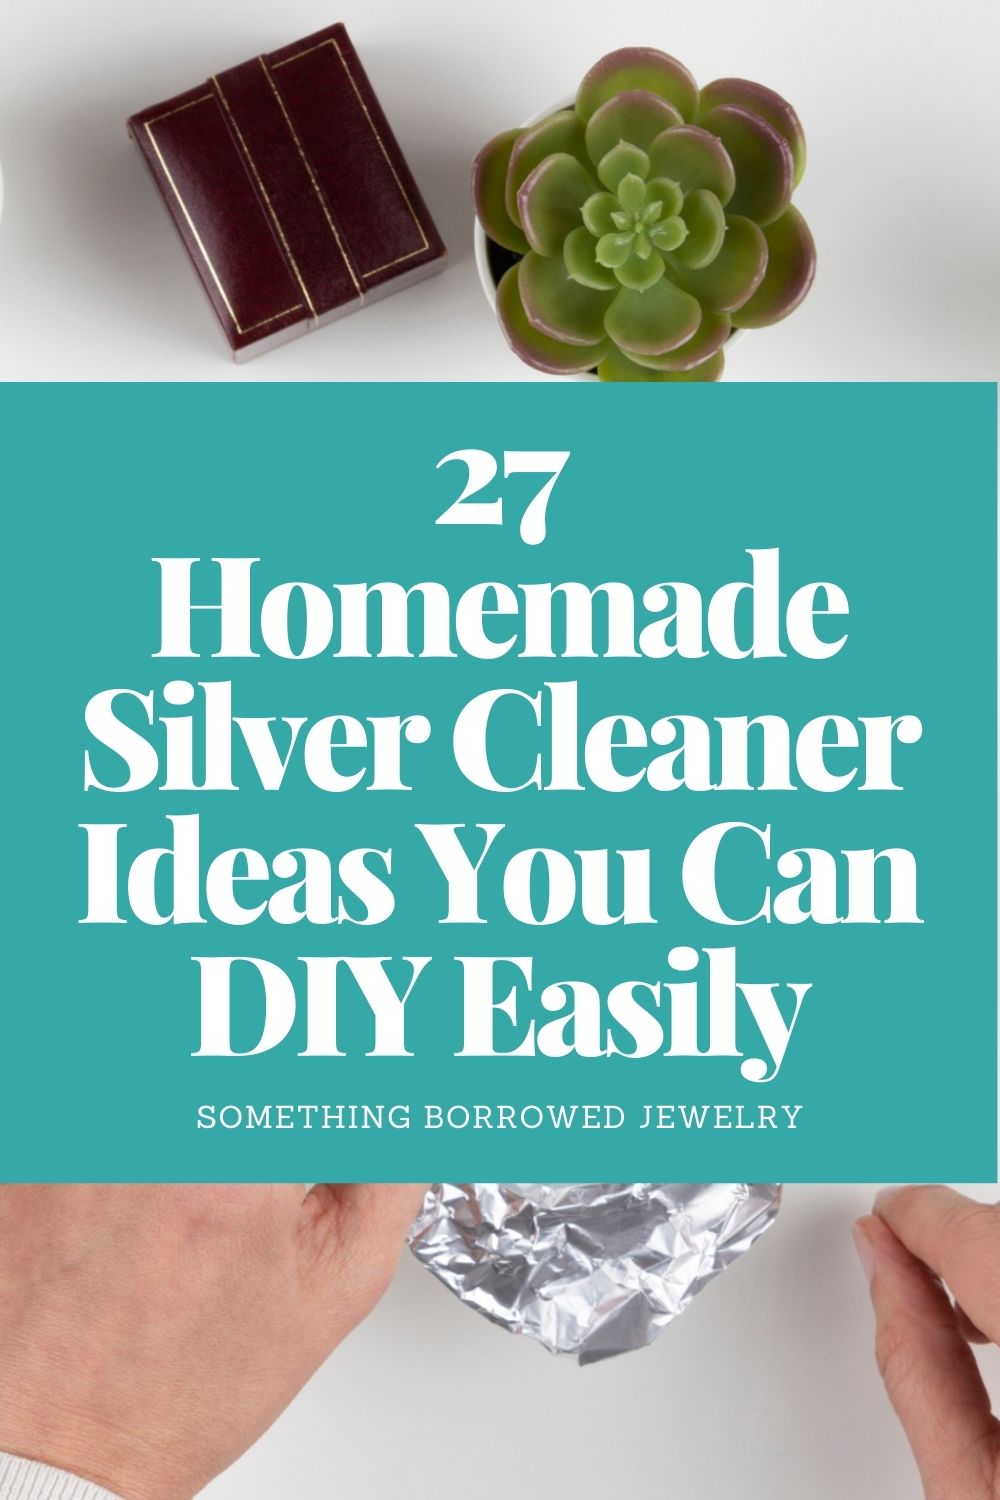 27 Homemade Silver Cleaner Ideas You Can DIY Easily pin 2